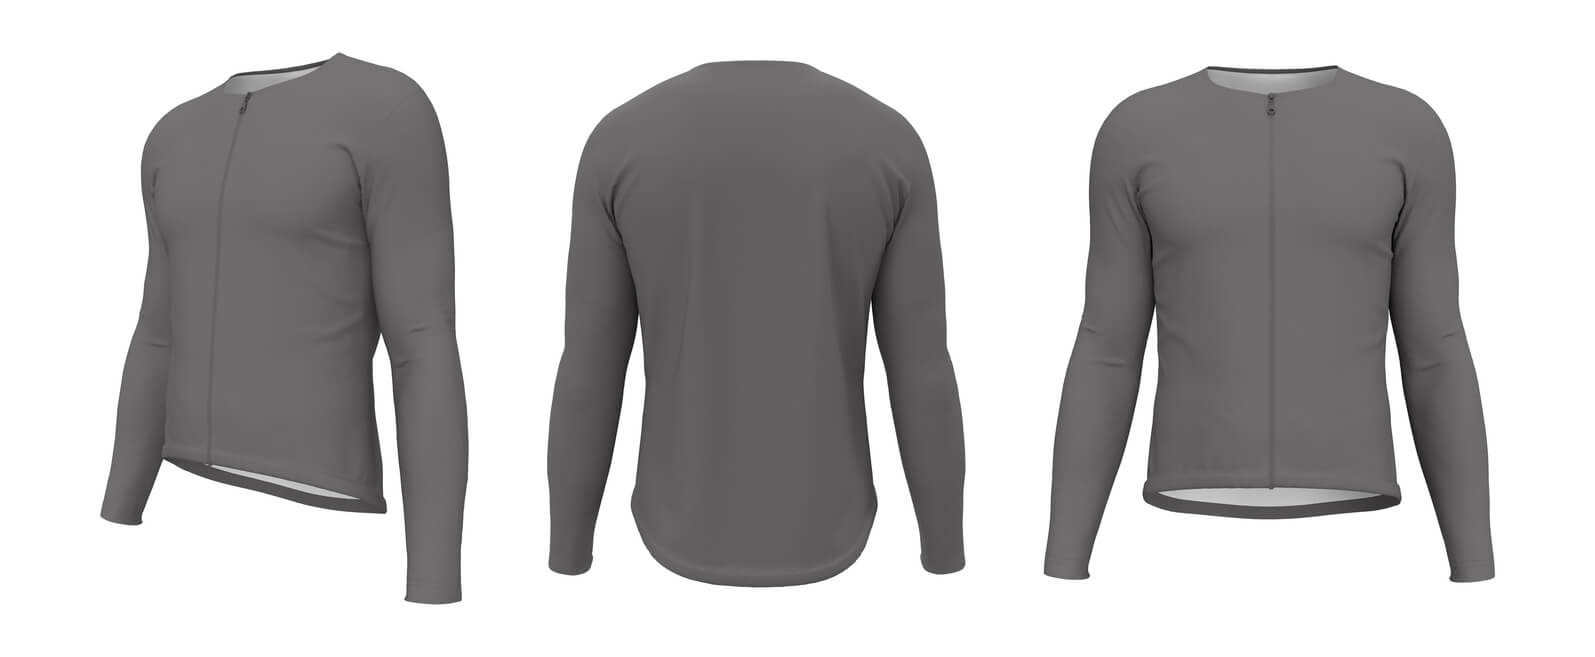 Base layer for cycling in spring